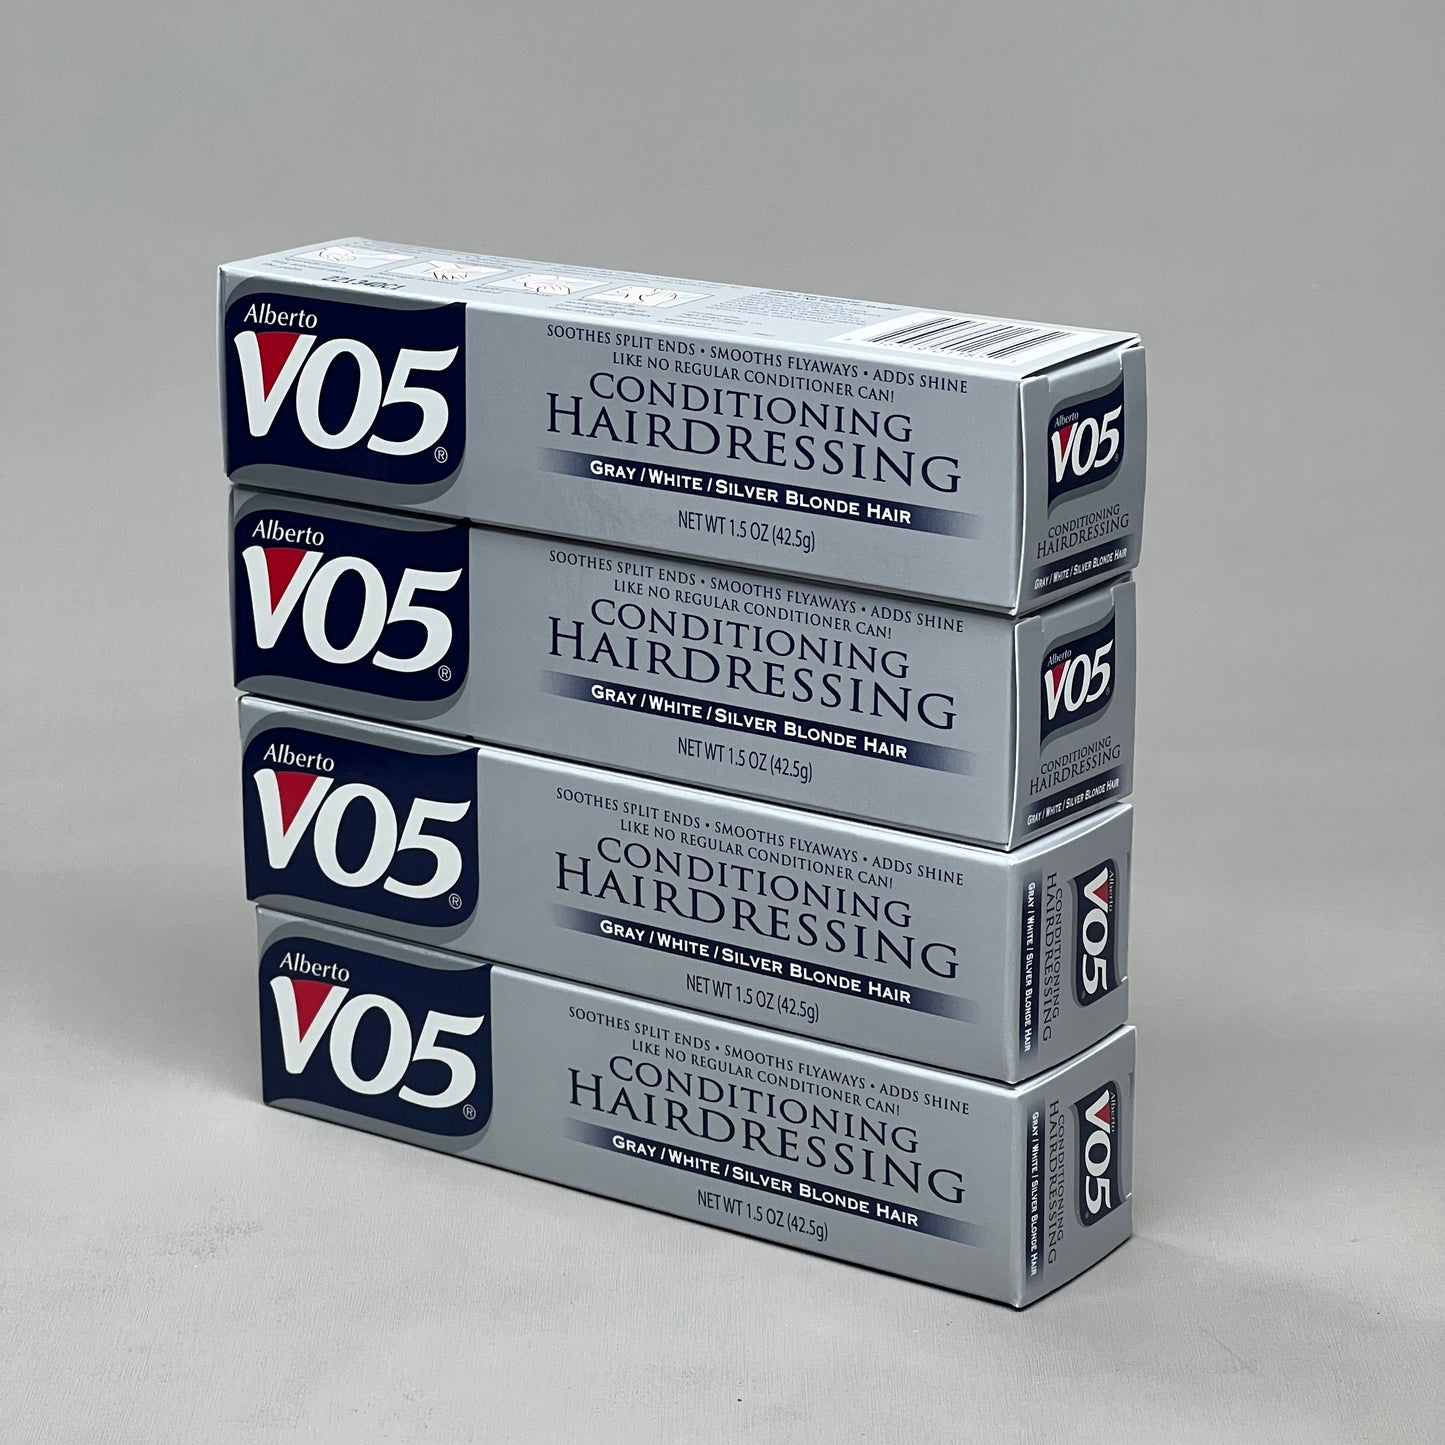 ALBERTO Vo5 Conditioning Hairdressing 4-PACK! Gray/White/Silver Blonde Hair 1.5 oz (New)